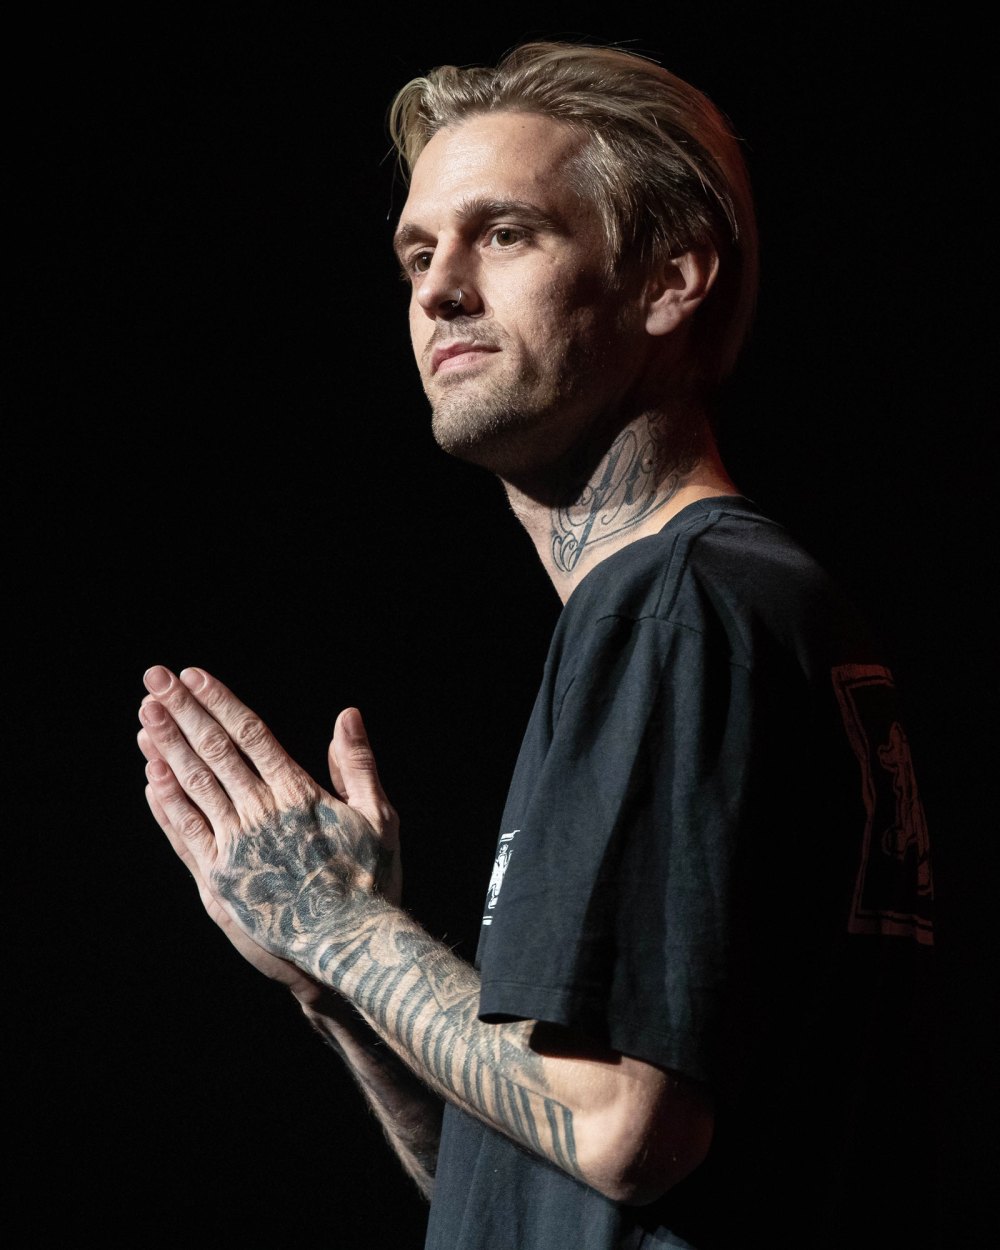 Aaron Carter Left Out of the 2023 Grammys In Memoriam Tribute 3 Months After His Death